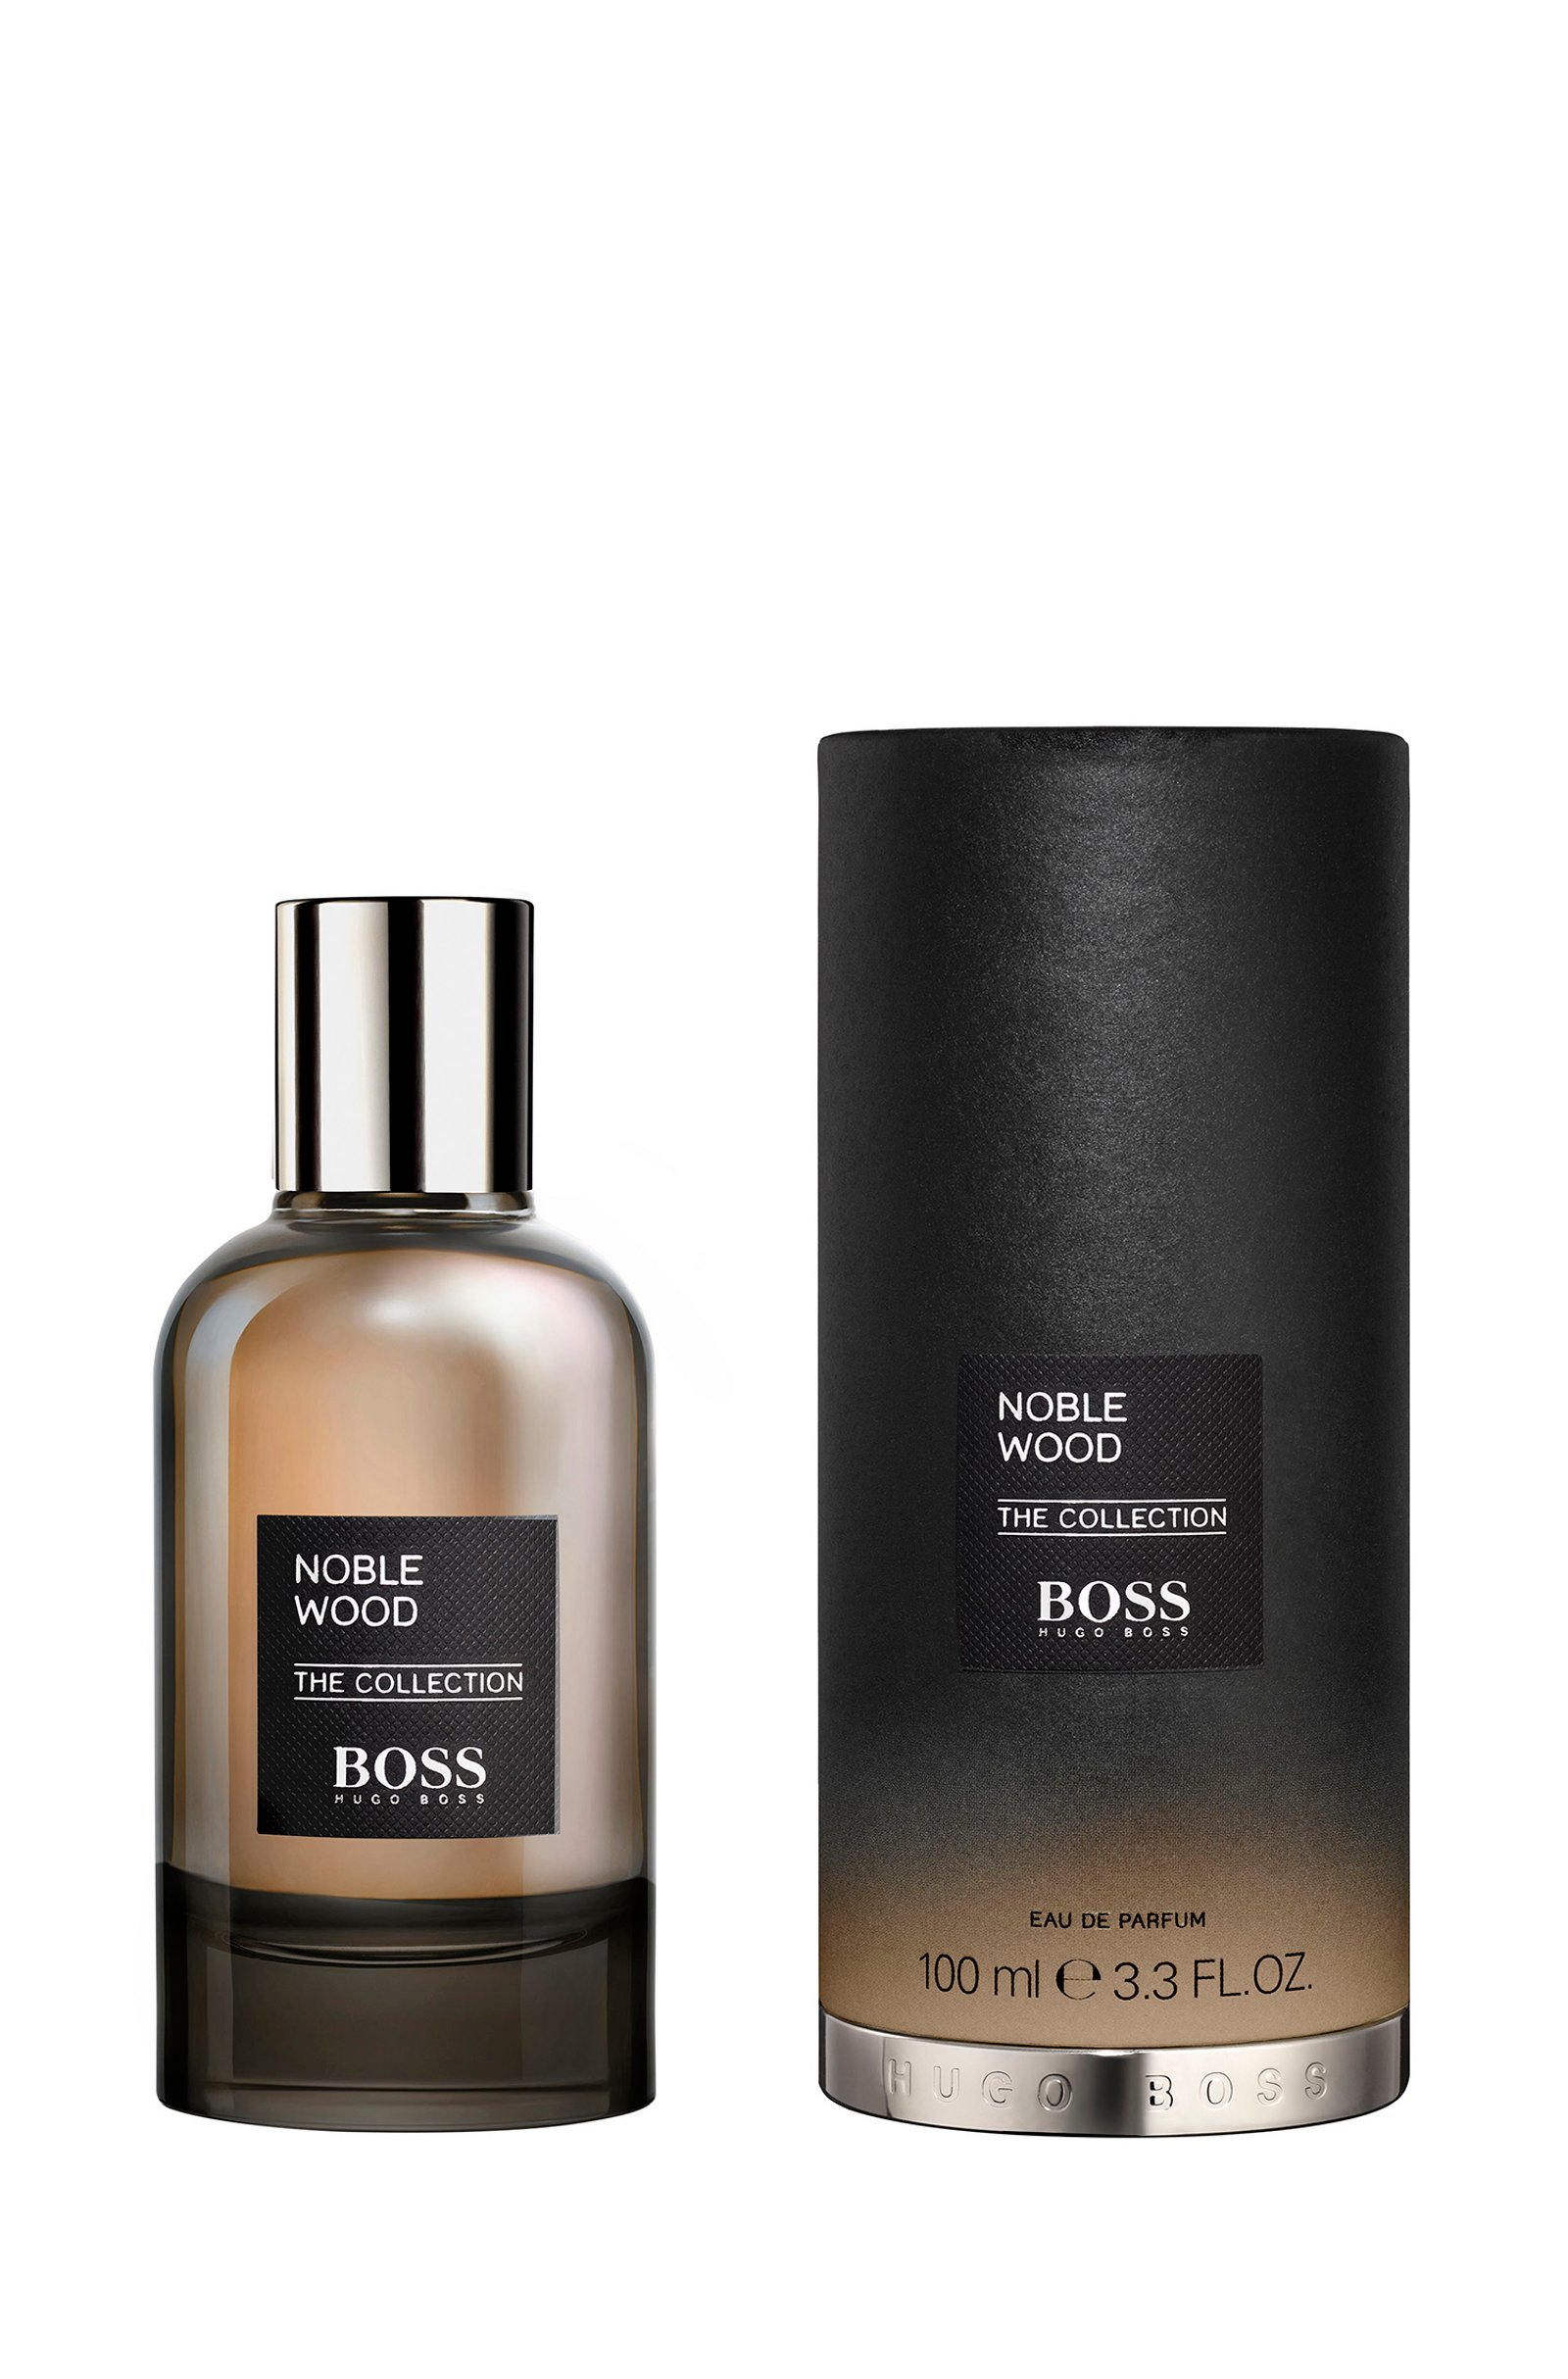 Hugo Boss The Collection Noble Wood, edp 100ml